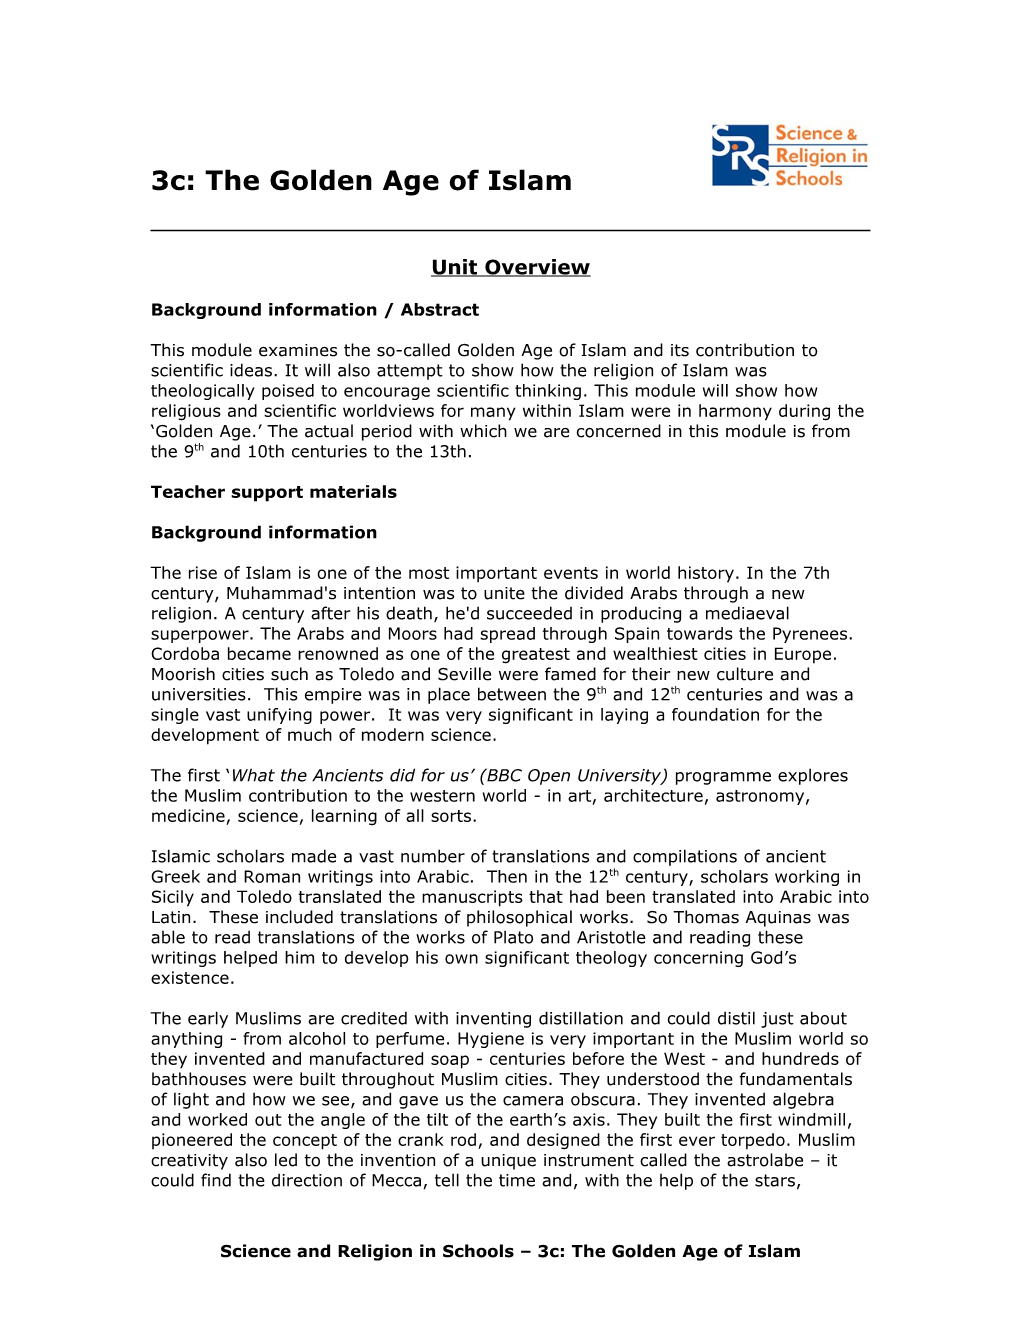 3C: the Golden Age of Islam